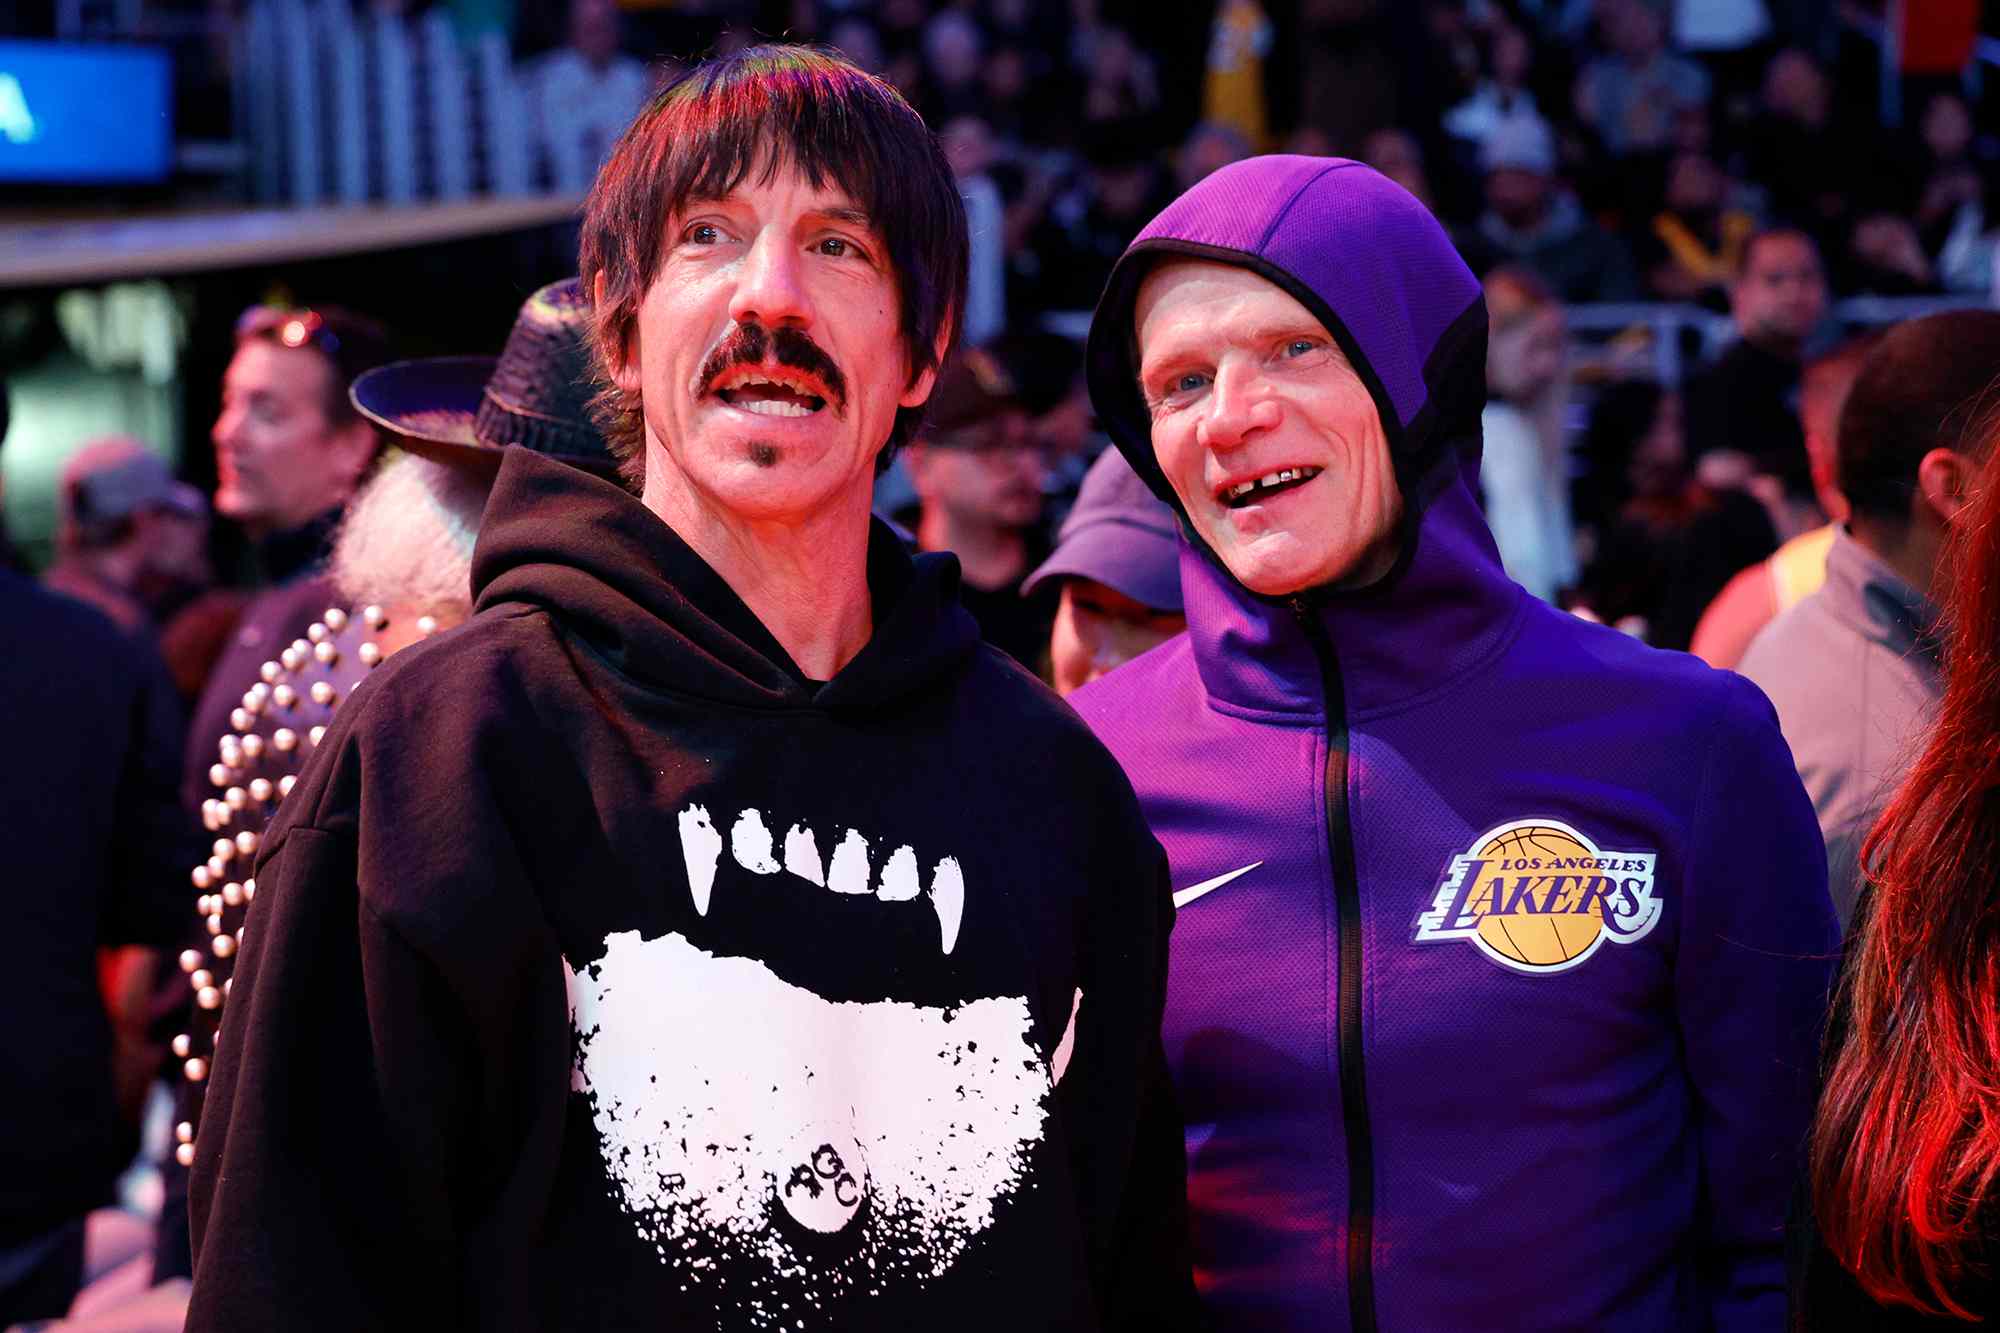 Red Hot Chili Peppers band members Anthony Kiedis (L) and Flea attend the basketball game between the Los Angeles Lakers and the New Orleans Pelicans at Crypto.com Arena 